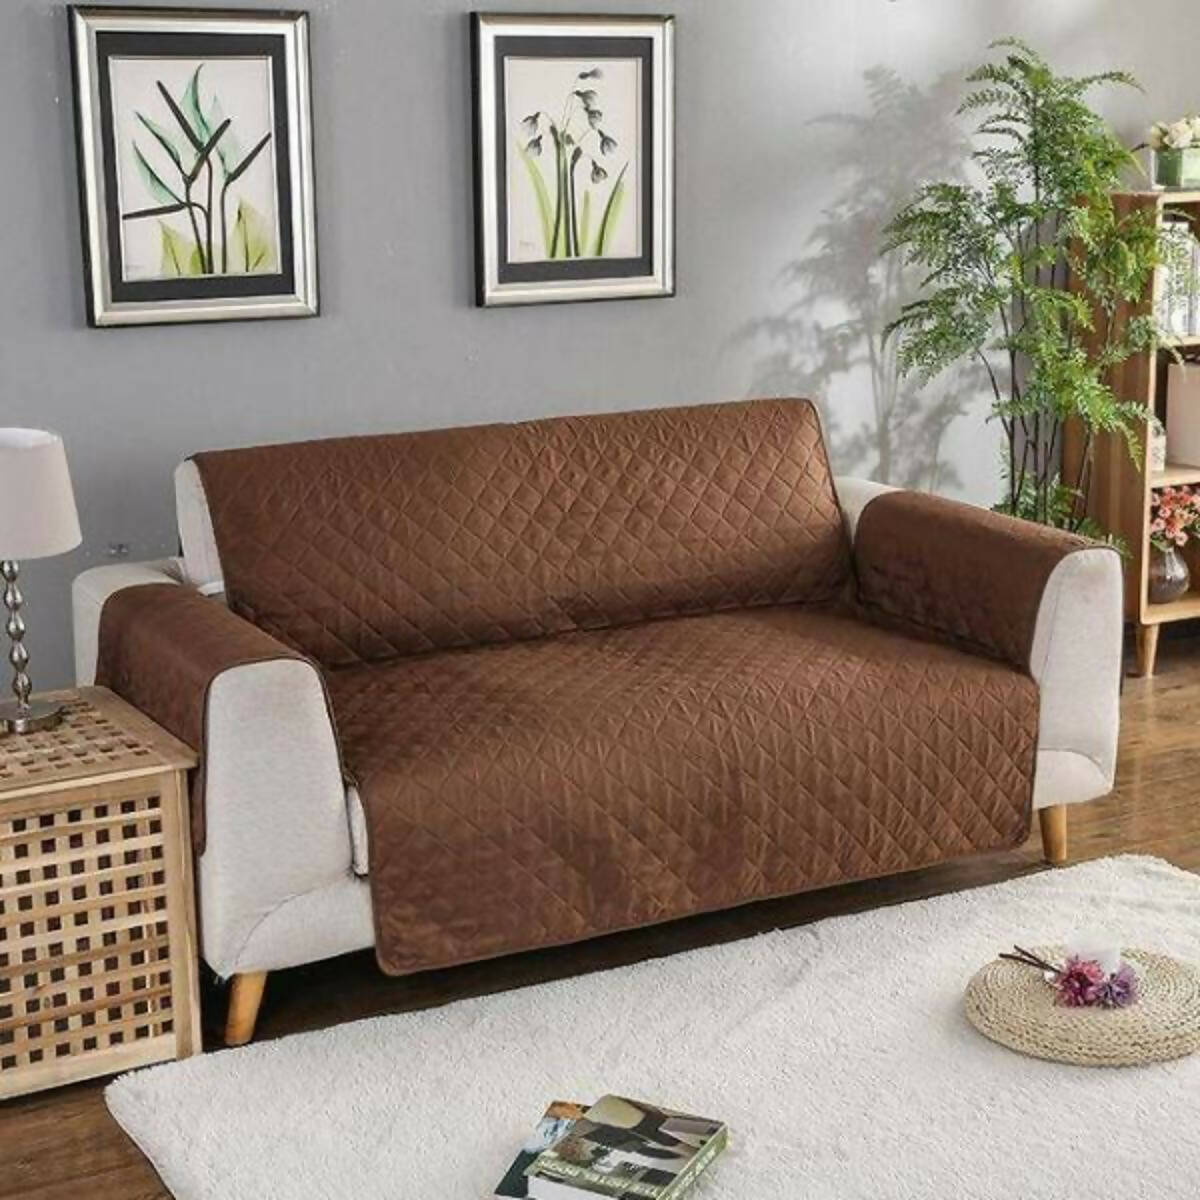 Cotton Quilted Sofa Covers (Copper)6 seater